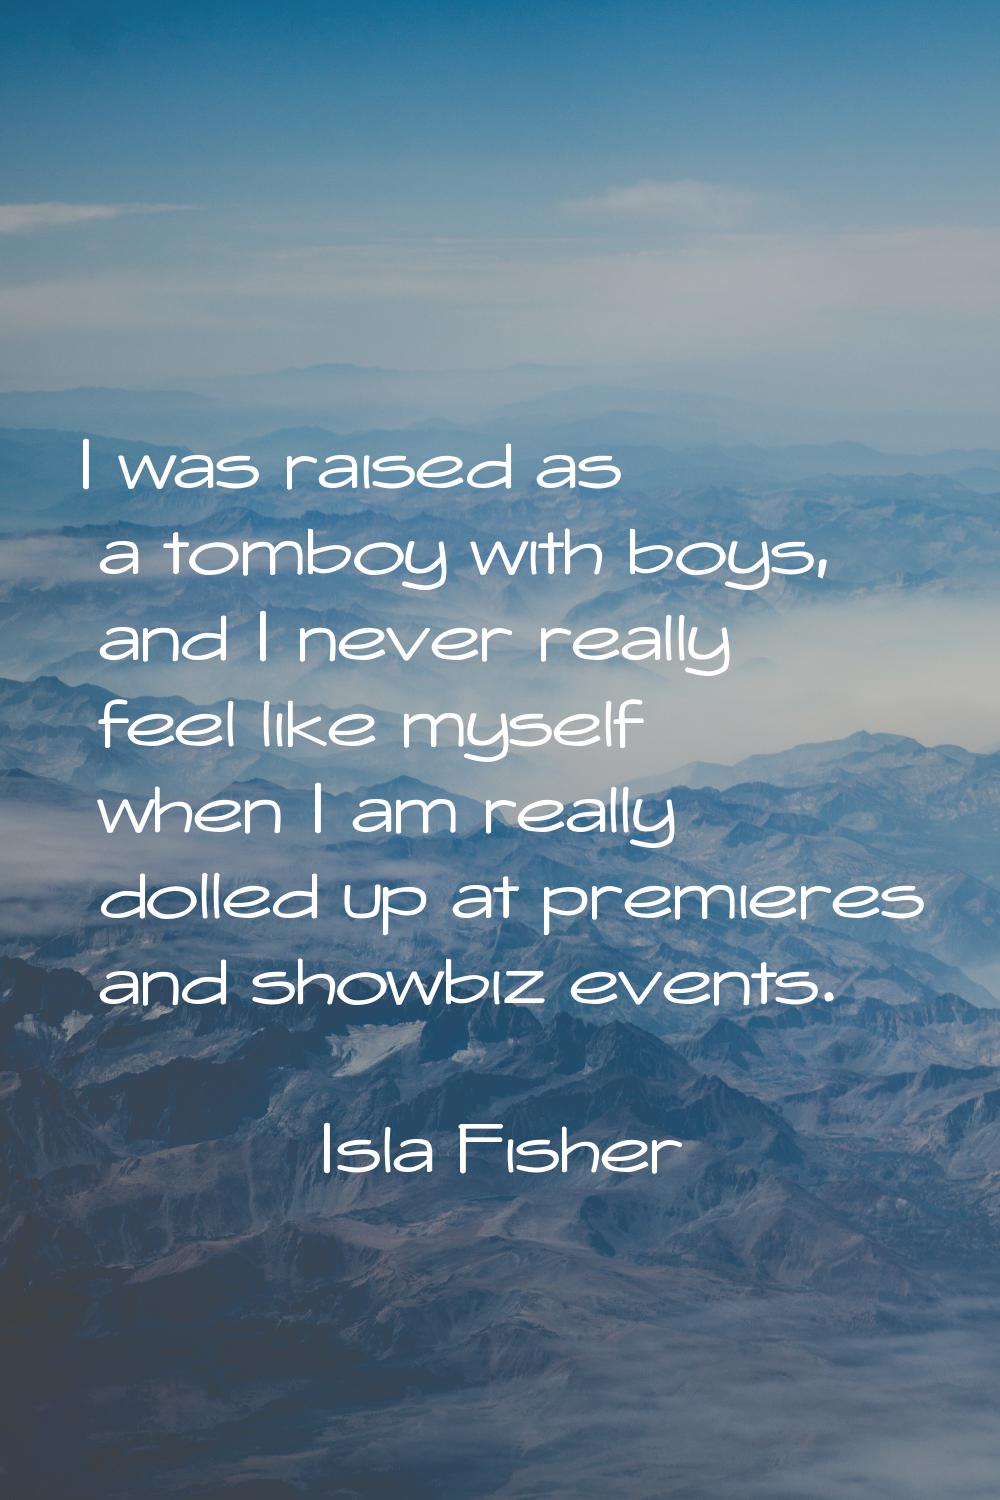 I was raised as a tomboy with boys, and I never really feel like myself when I am really dolled up 